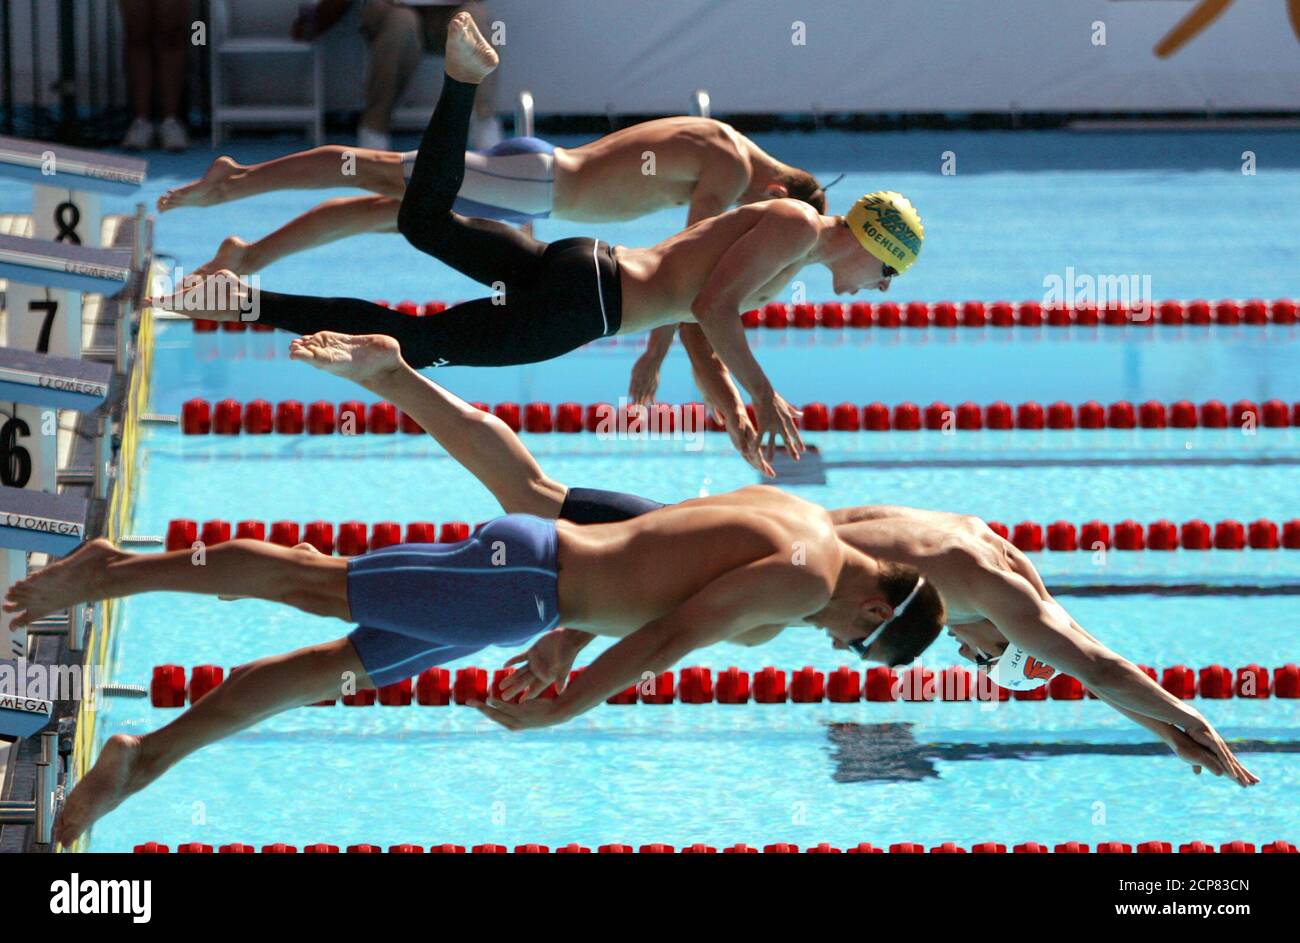 Swimmers display different styles as they dive into the pool for the 1500 meter freestyle semifinals at the U.S. Olympic Swimming Trials in Long Beach, California, July 13, 2004. From left are swimmers Christian Sprang (Gloucester County swim club), John Koehler (Dayton Raiders), Nathan Knopf (Auburn Aquatics/Lakeside), and Christopher George (Bolles School Sh). REUTERS/Lucy Nicholson  LN Stock Photo